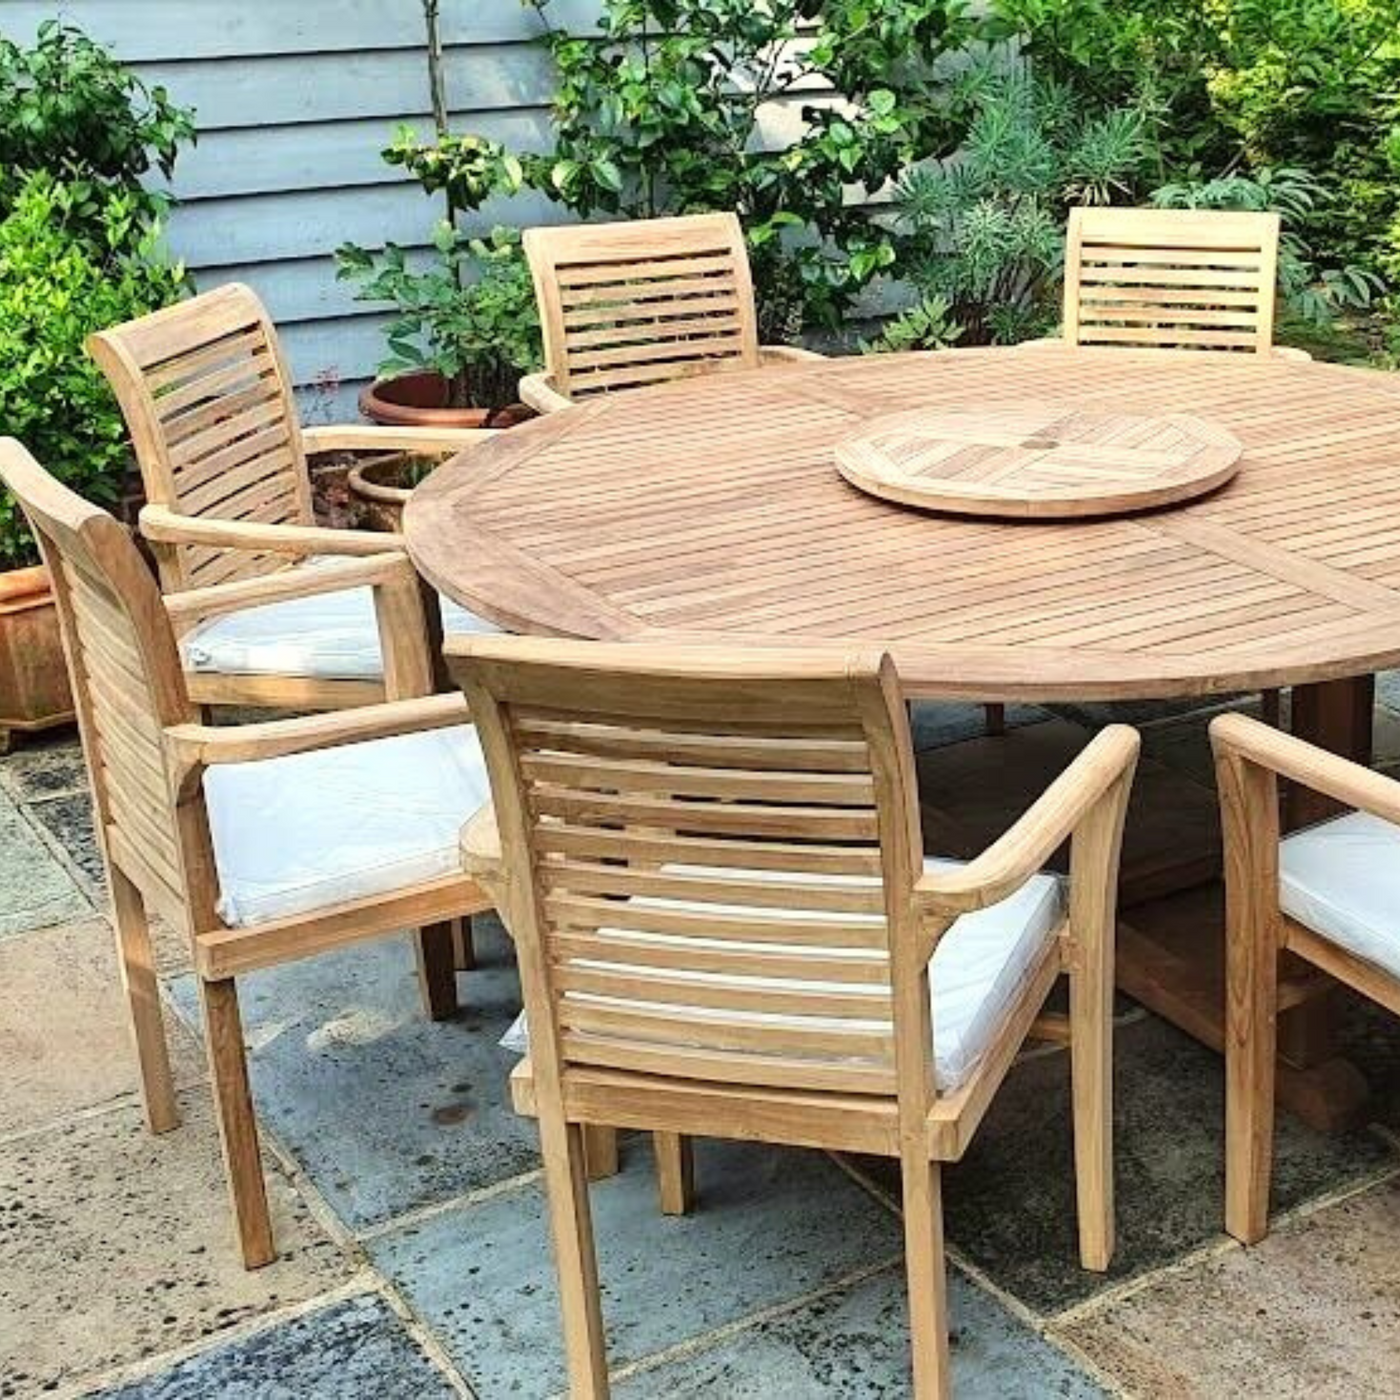 Round Teak 180cm Maximus Round Stacking Set with eight Oxford Stacking Chairs, complete set cushions included, set on a brick floor with lush green plants and a wooden fence in the background.